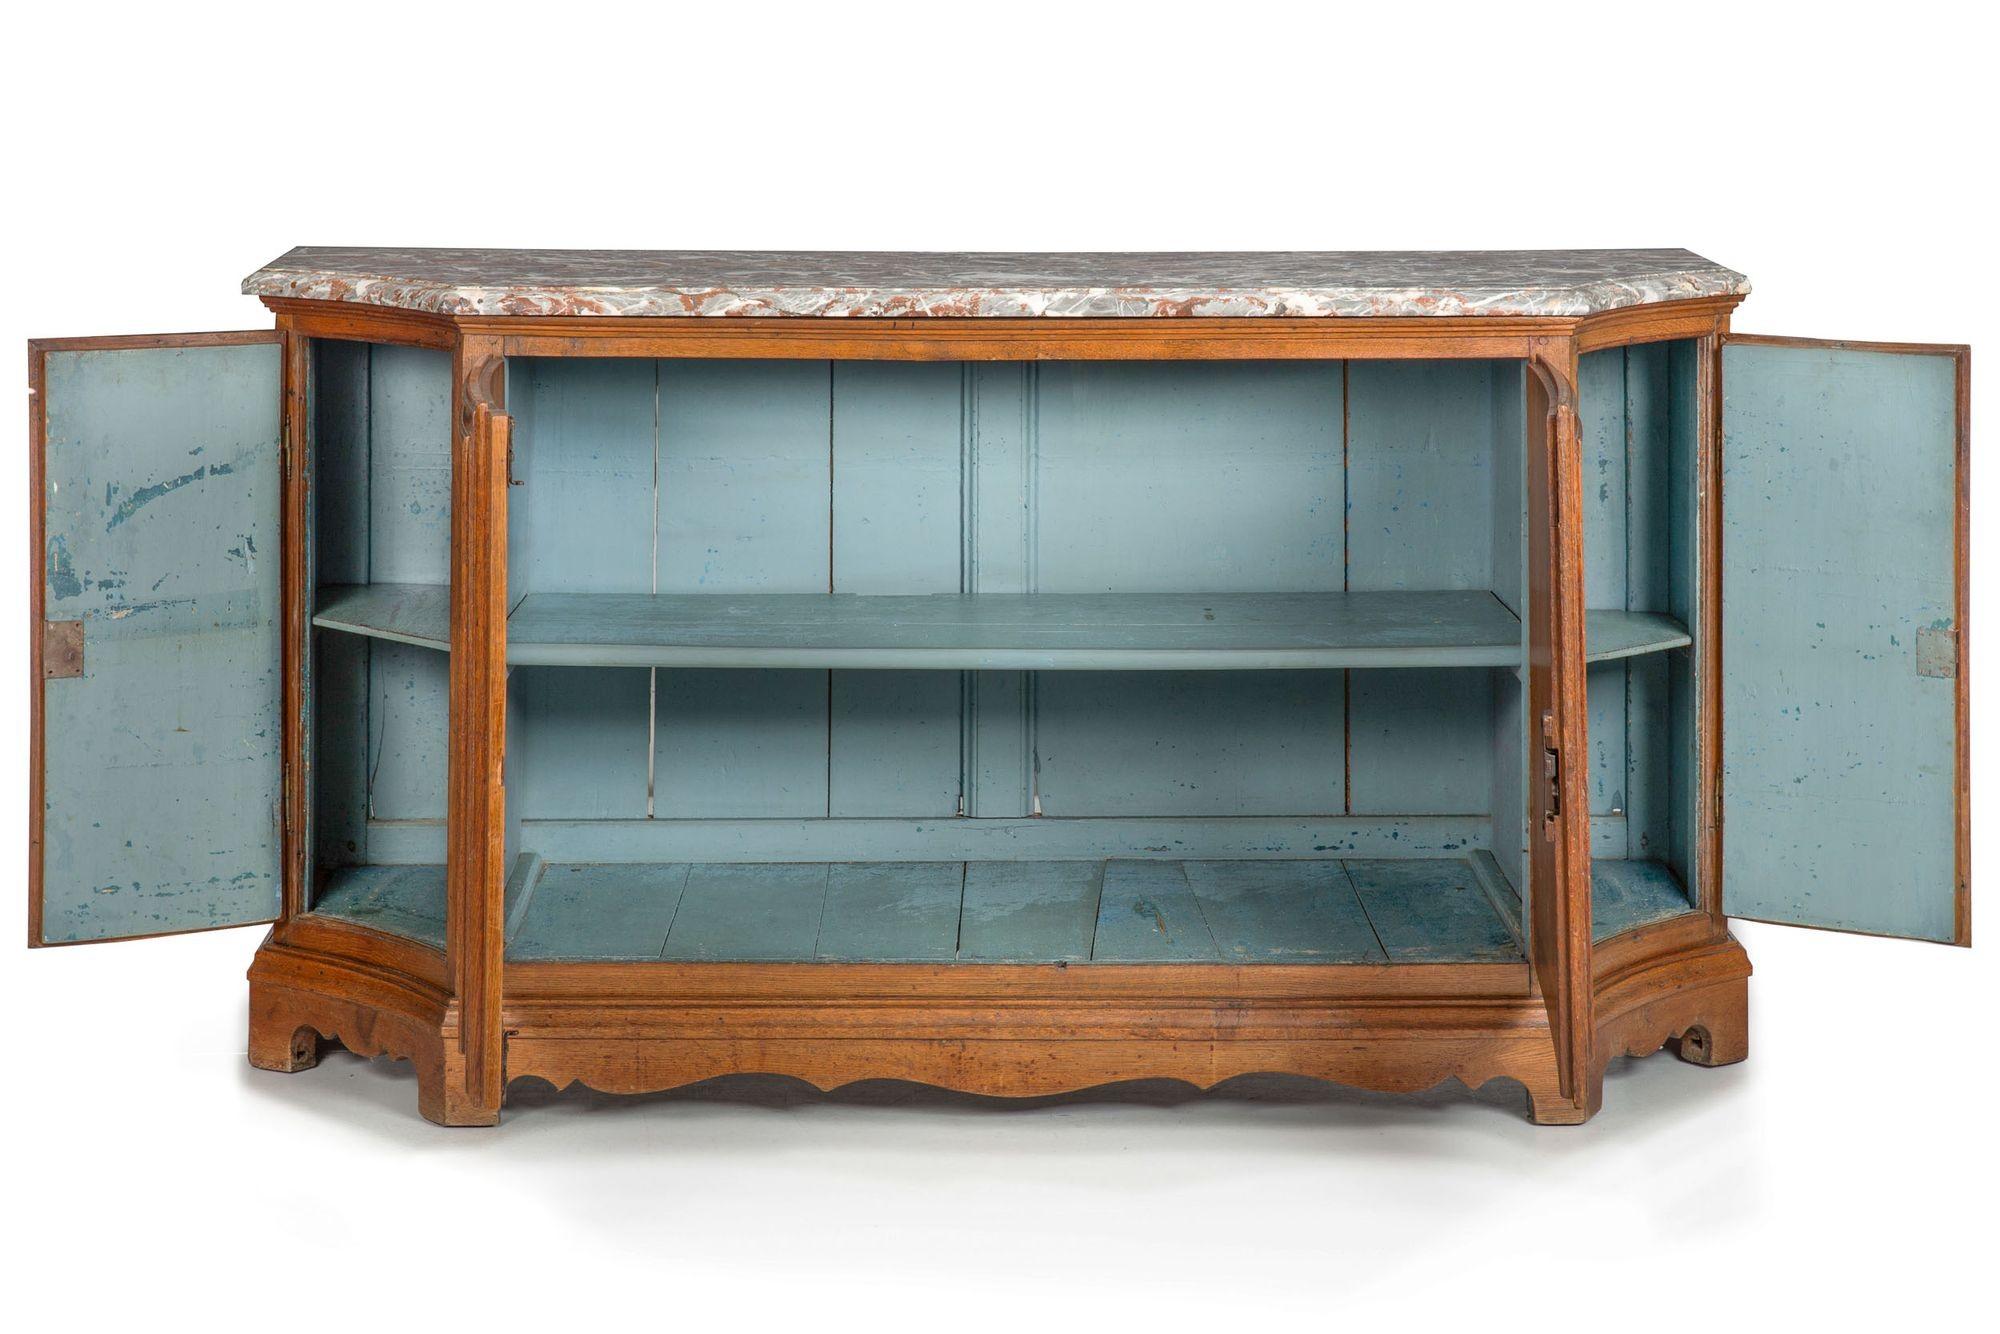 French Provincial Antique Oak and Marble Buffet Sideboard Cabinet ca. 1880 In Good Condition For Sale In Shippensburg, PA